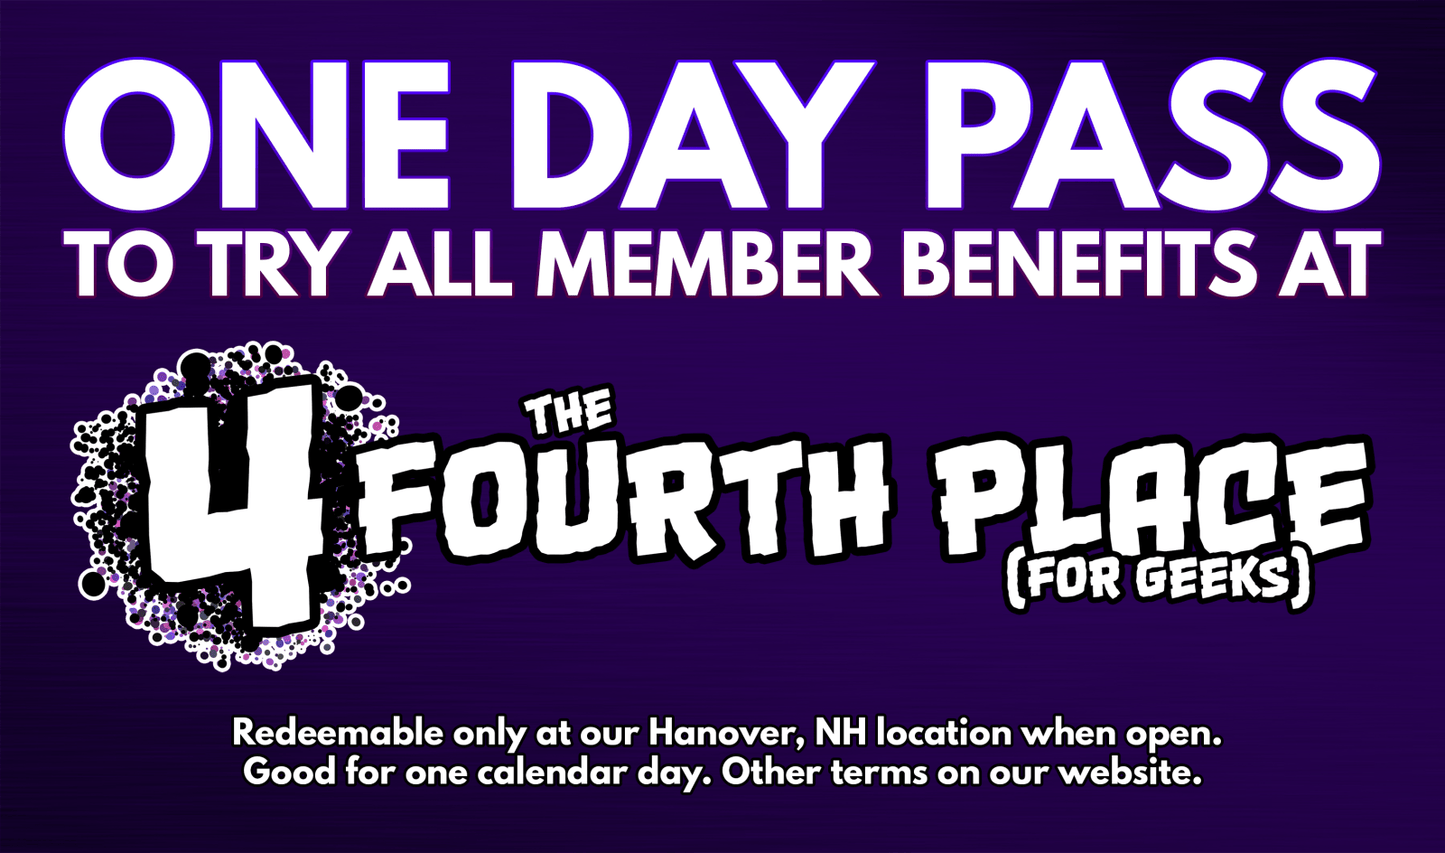 One Day Pass (Hanover, NH) - The Fourth Place